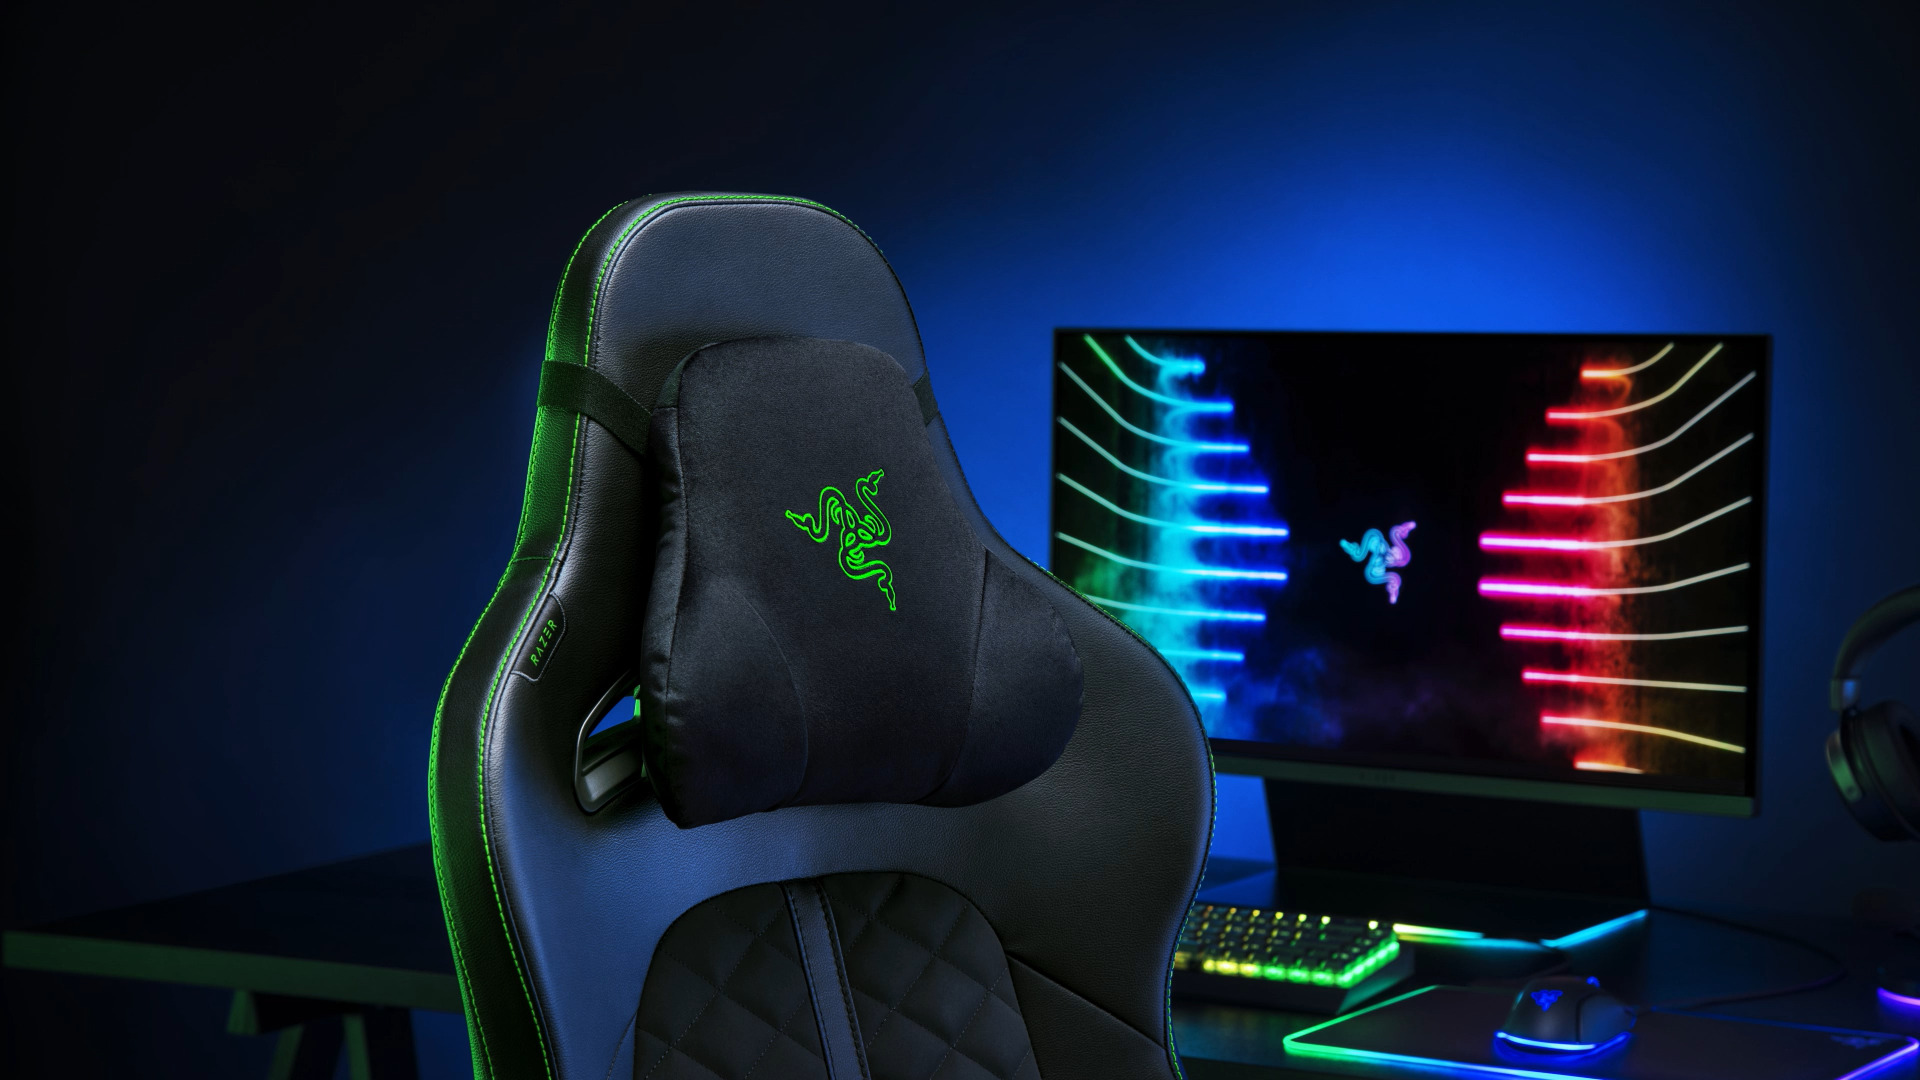 Razer's latest online exclusive product is an RGB-enabled headrest thumbnail